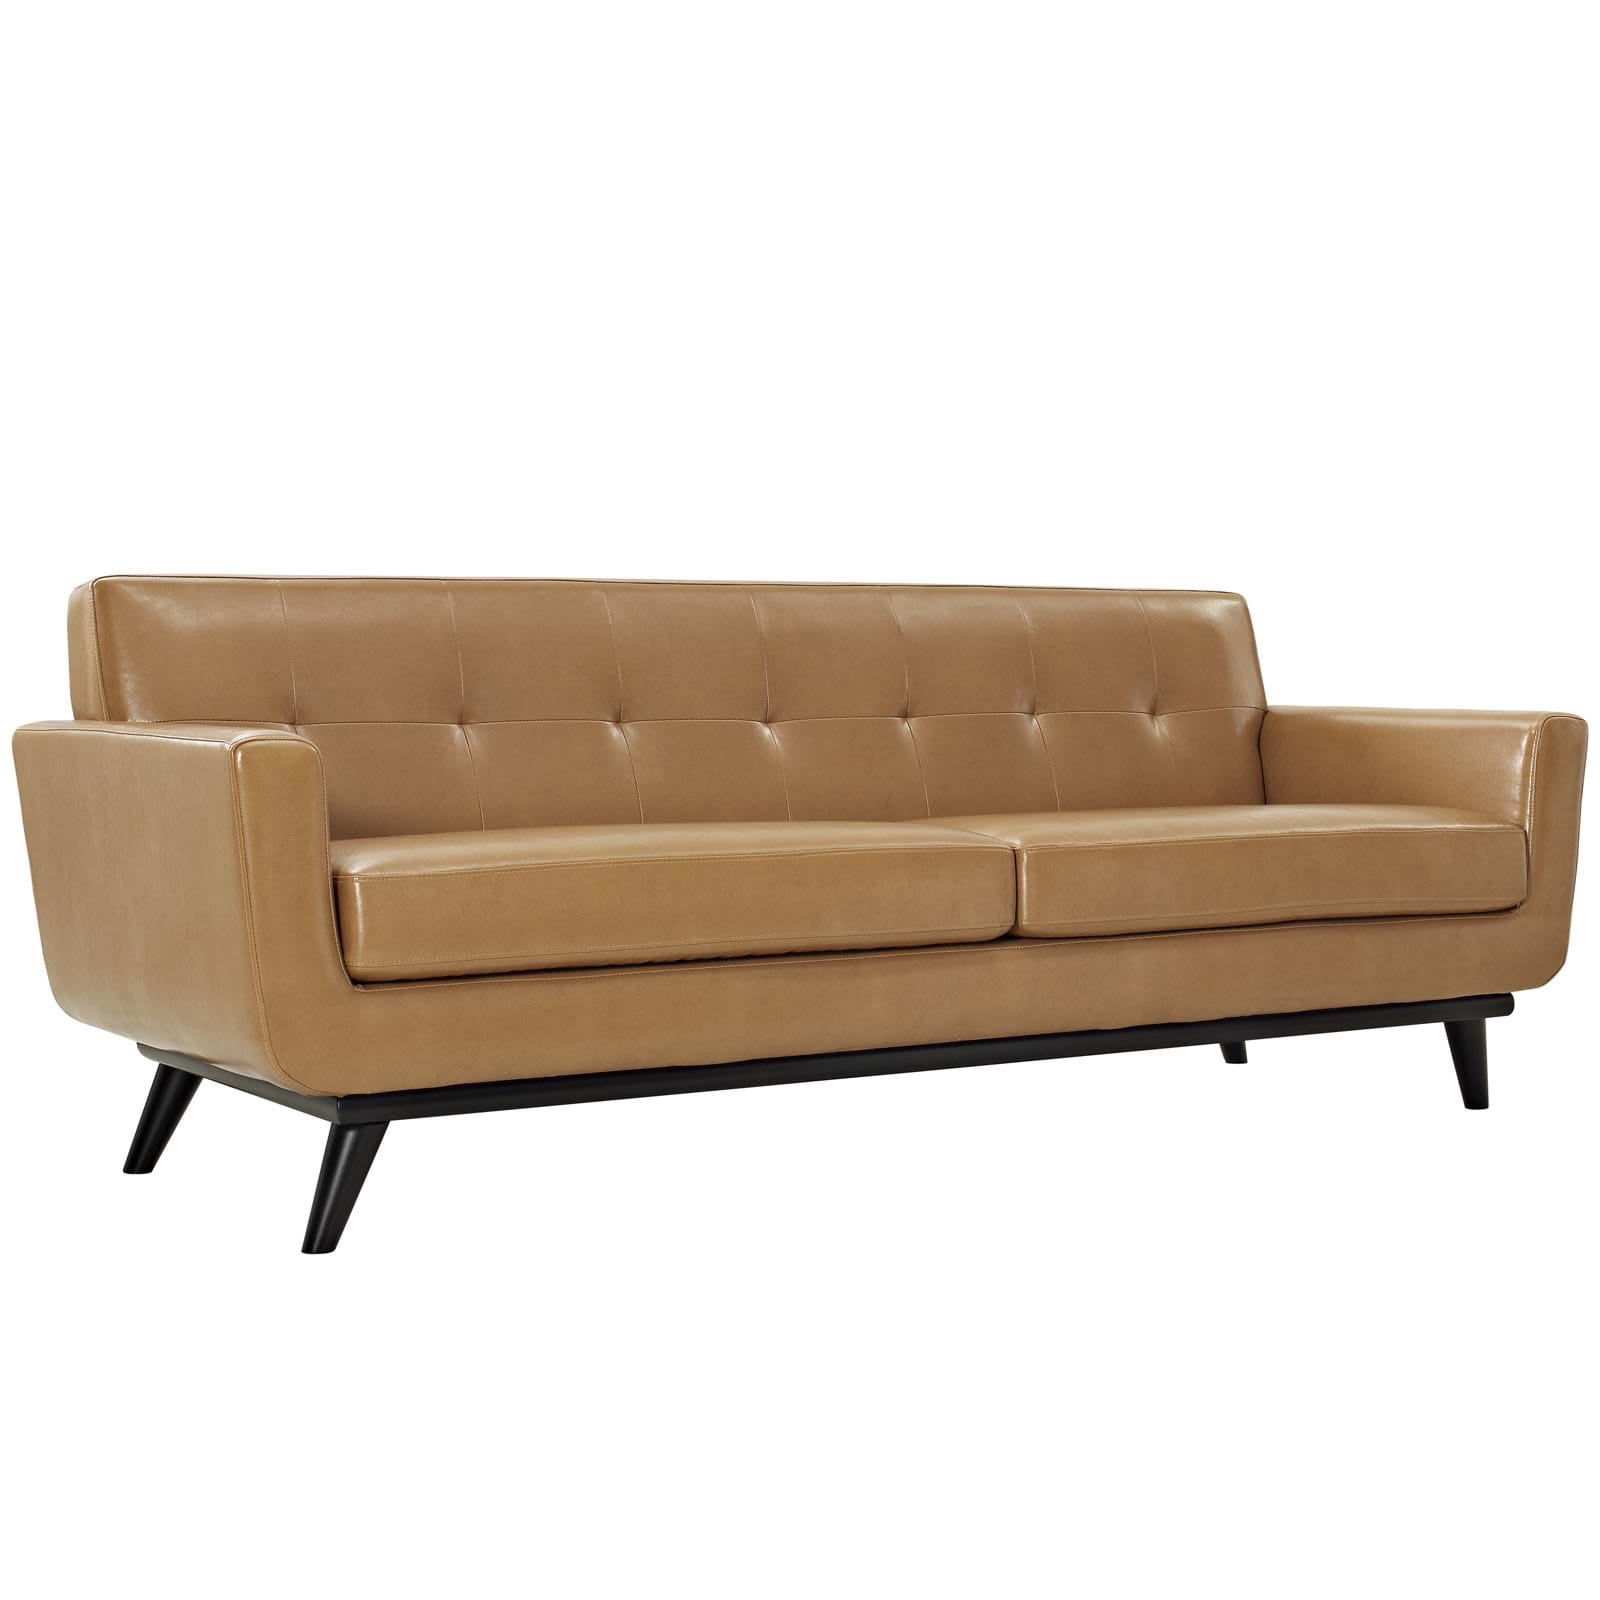 Engage Bonded Leather Sofa in Tan